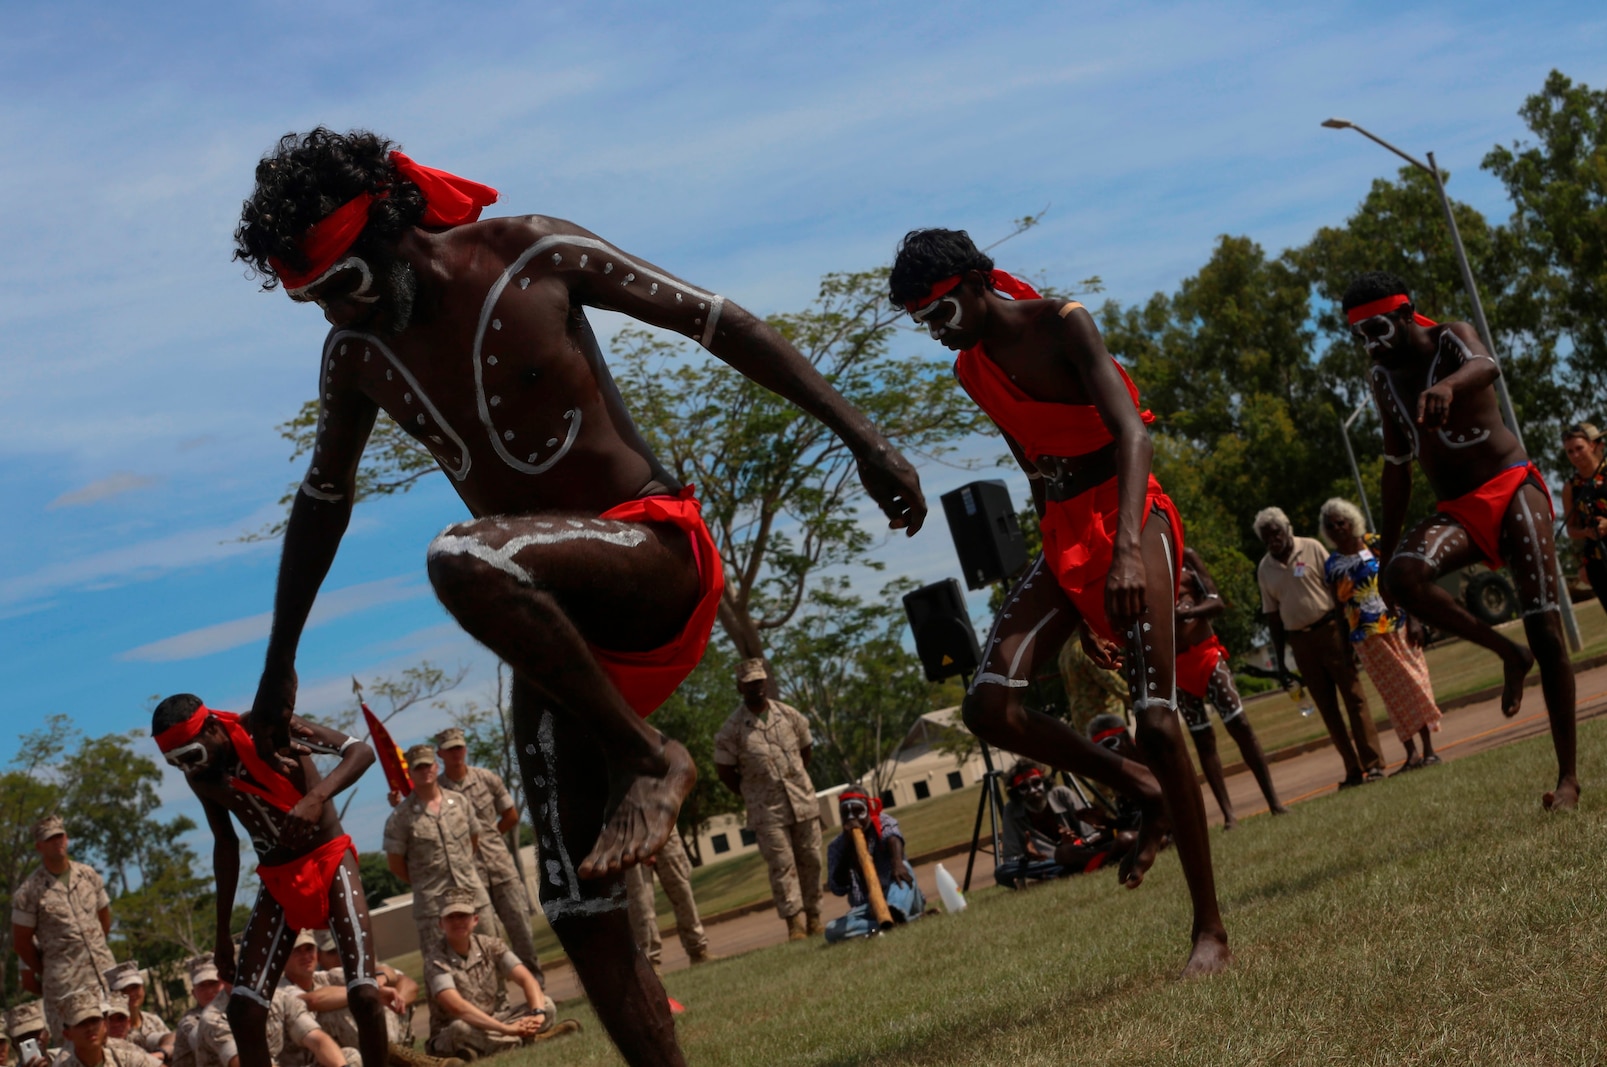 Aboriginal dancers perform for U.S. Marines with Marine Rotational Force – Darwin during a “Welcome to Country” ceremony April 22 at Robertson Barracks, Palmerston, Australia. Brigadier Mick Ryan, commander, 1st Brigade, Australian Army, Australian Defence Force, spoke about the relationship between the Marines and Australians during the MRF-D deployment, and introduced Marines to aboriginal culture by inviting the Kenbi Dancers to conduct a welcoming performance.  MRF-D is the deployment of U.S. Marines to Darwin and the Northern Territory, for approximately six months at a time, where they will conduct exercises and training on a rotational basis with the ADF. (U.S. Marine Corps photo by Lance Cpl. Kathryn Howard/Released)